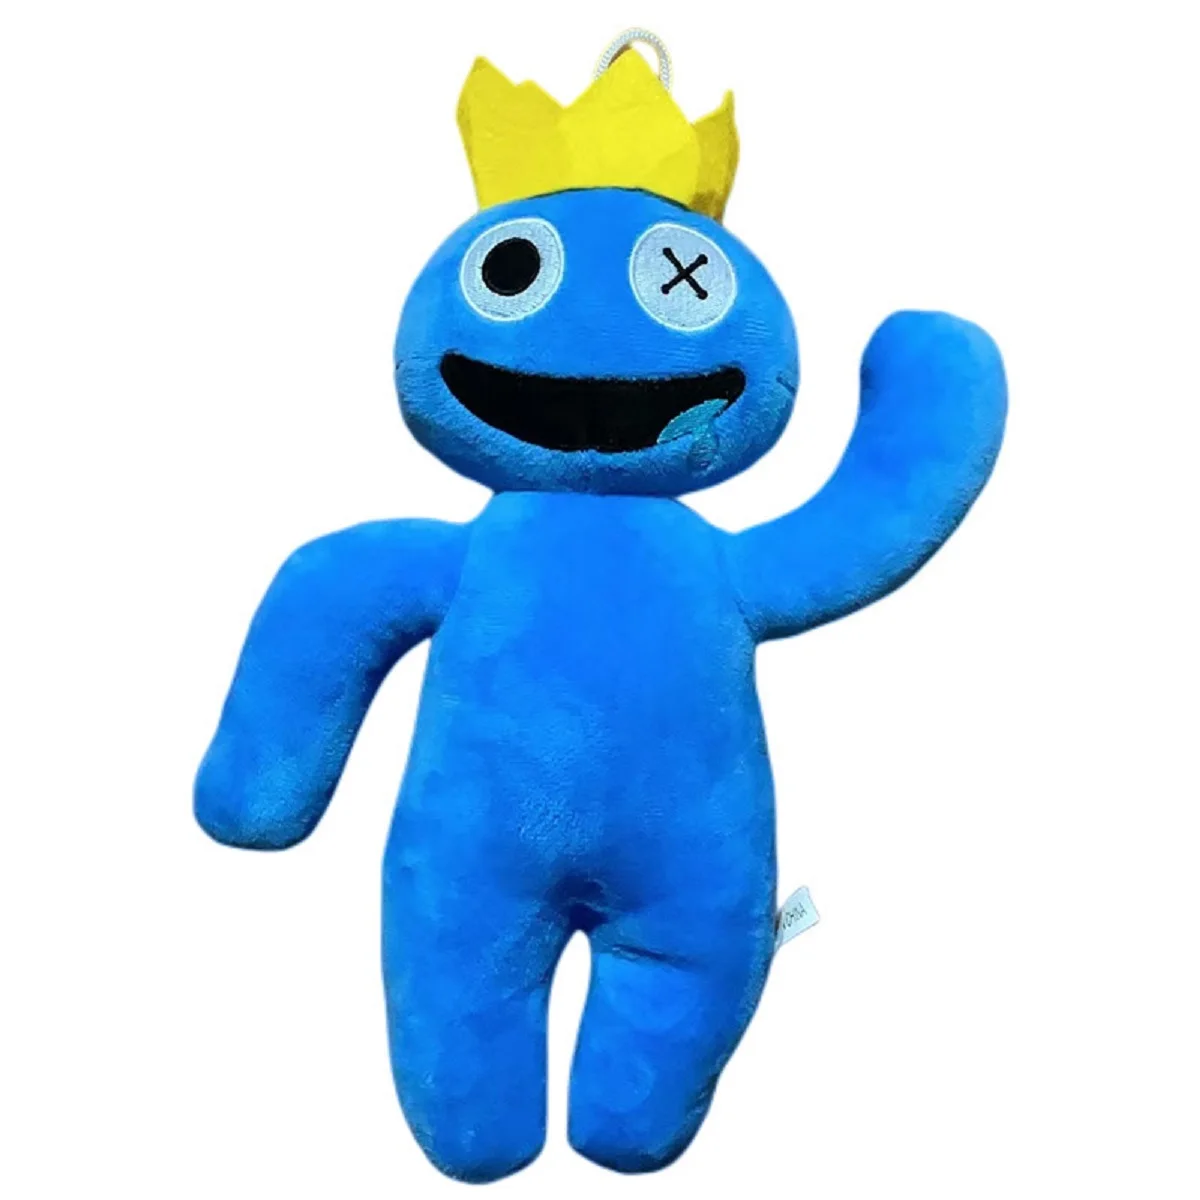 2022 New 20cm Roblox Rainbow Friends Plush Toy Cartoon Game Character Doll  Blue Monster Soft Stuffed Animal Toys - China Toy and Roblox Rainbow Friends  price